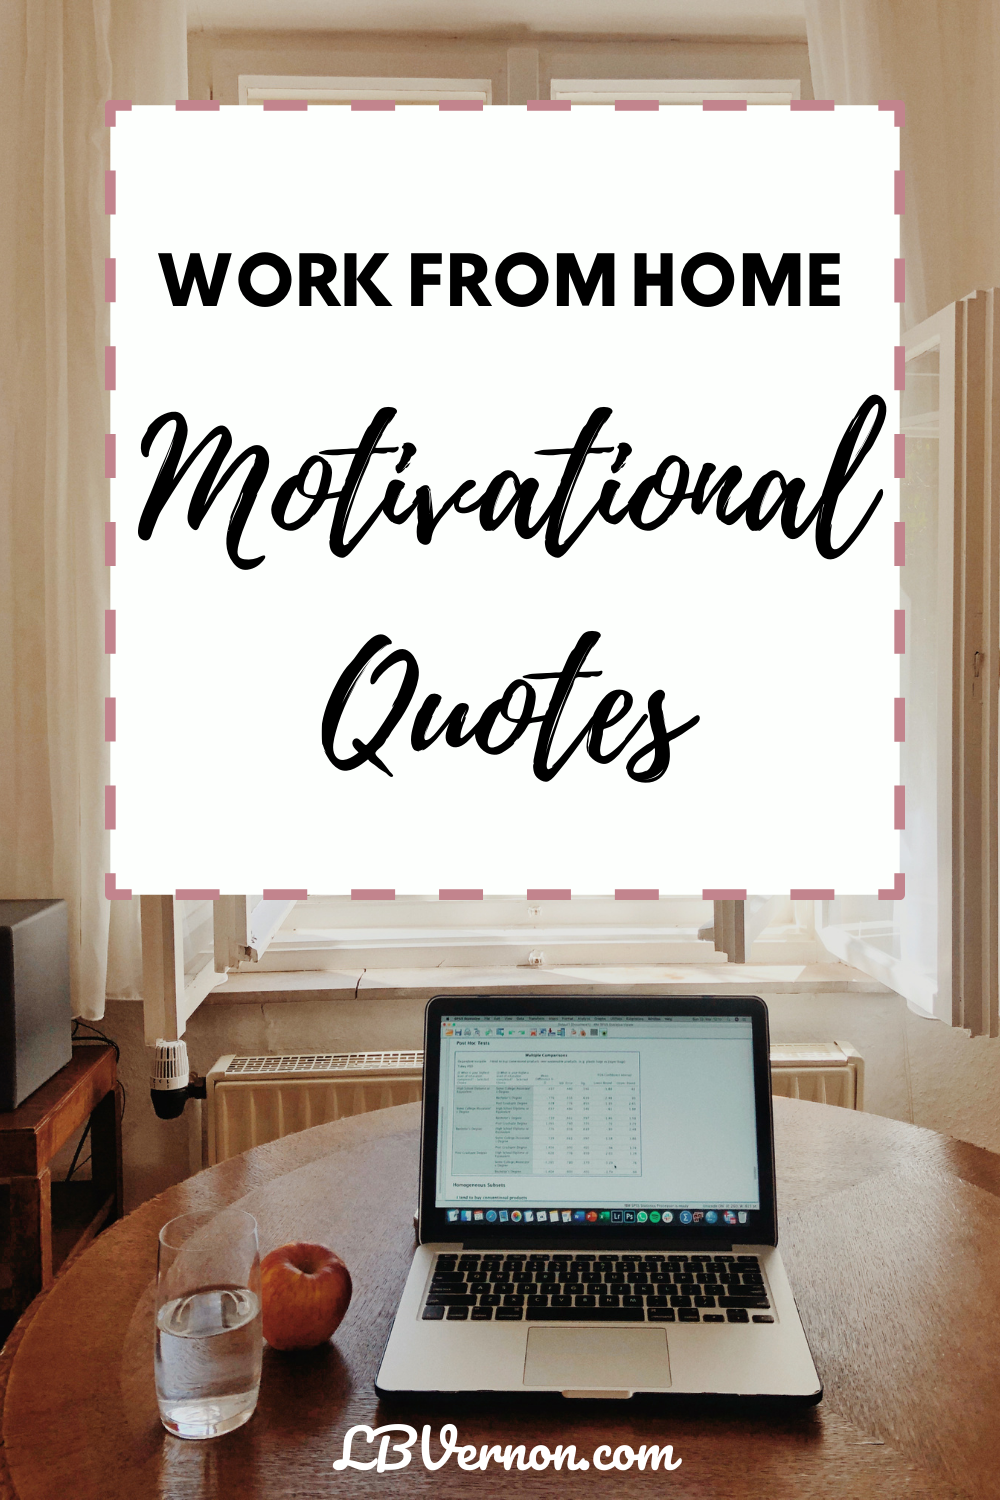 Work From Home Motivational Quotes - LBVernon